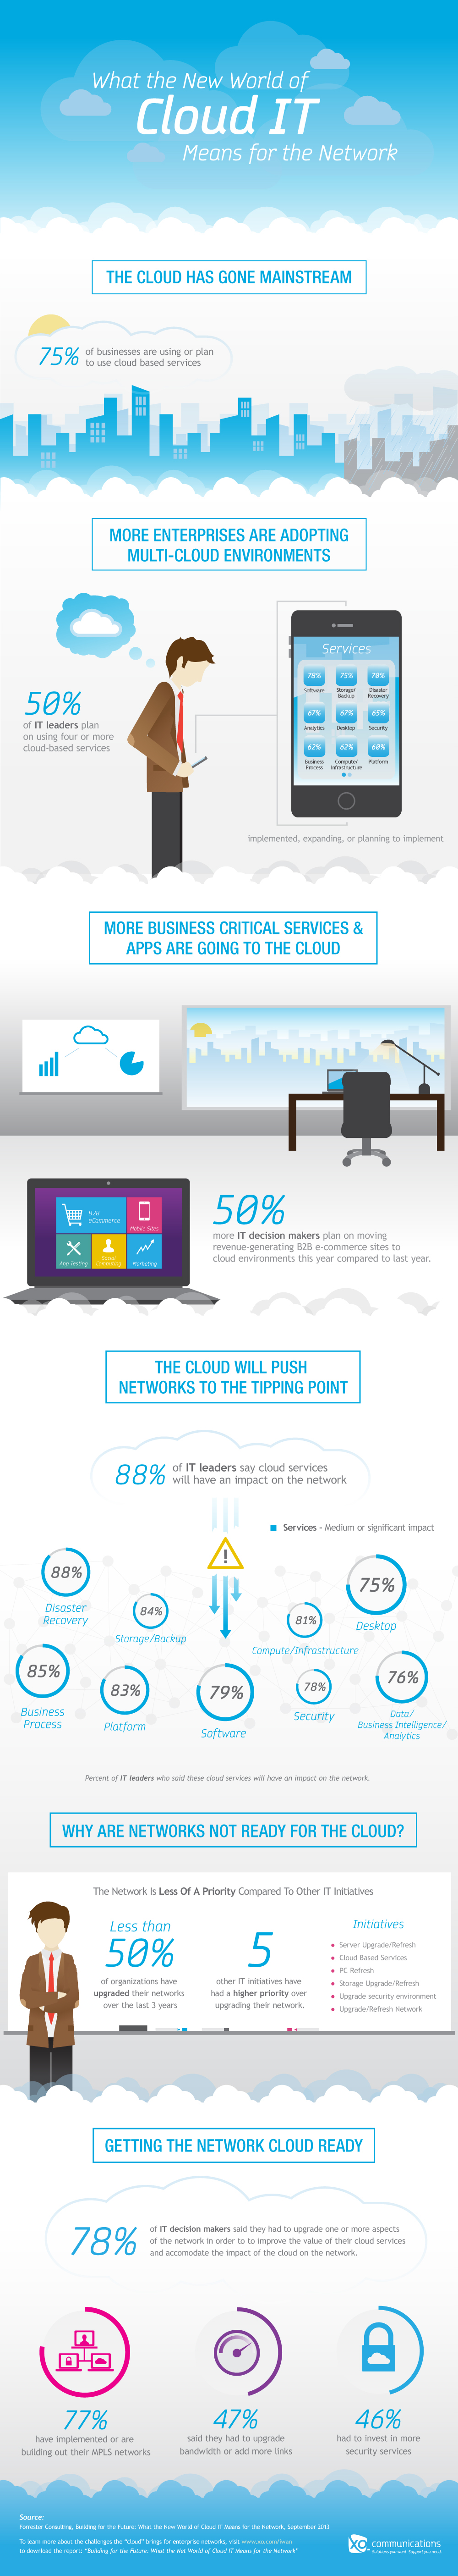 cloud Information Technology infographic XO Communications